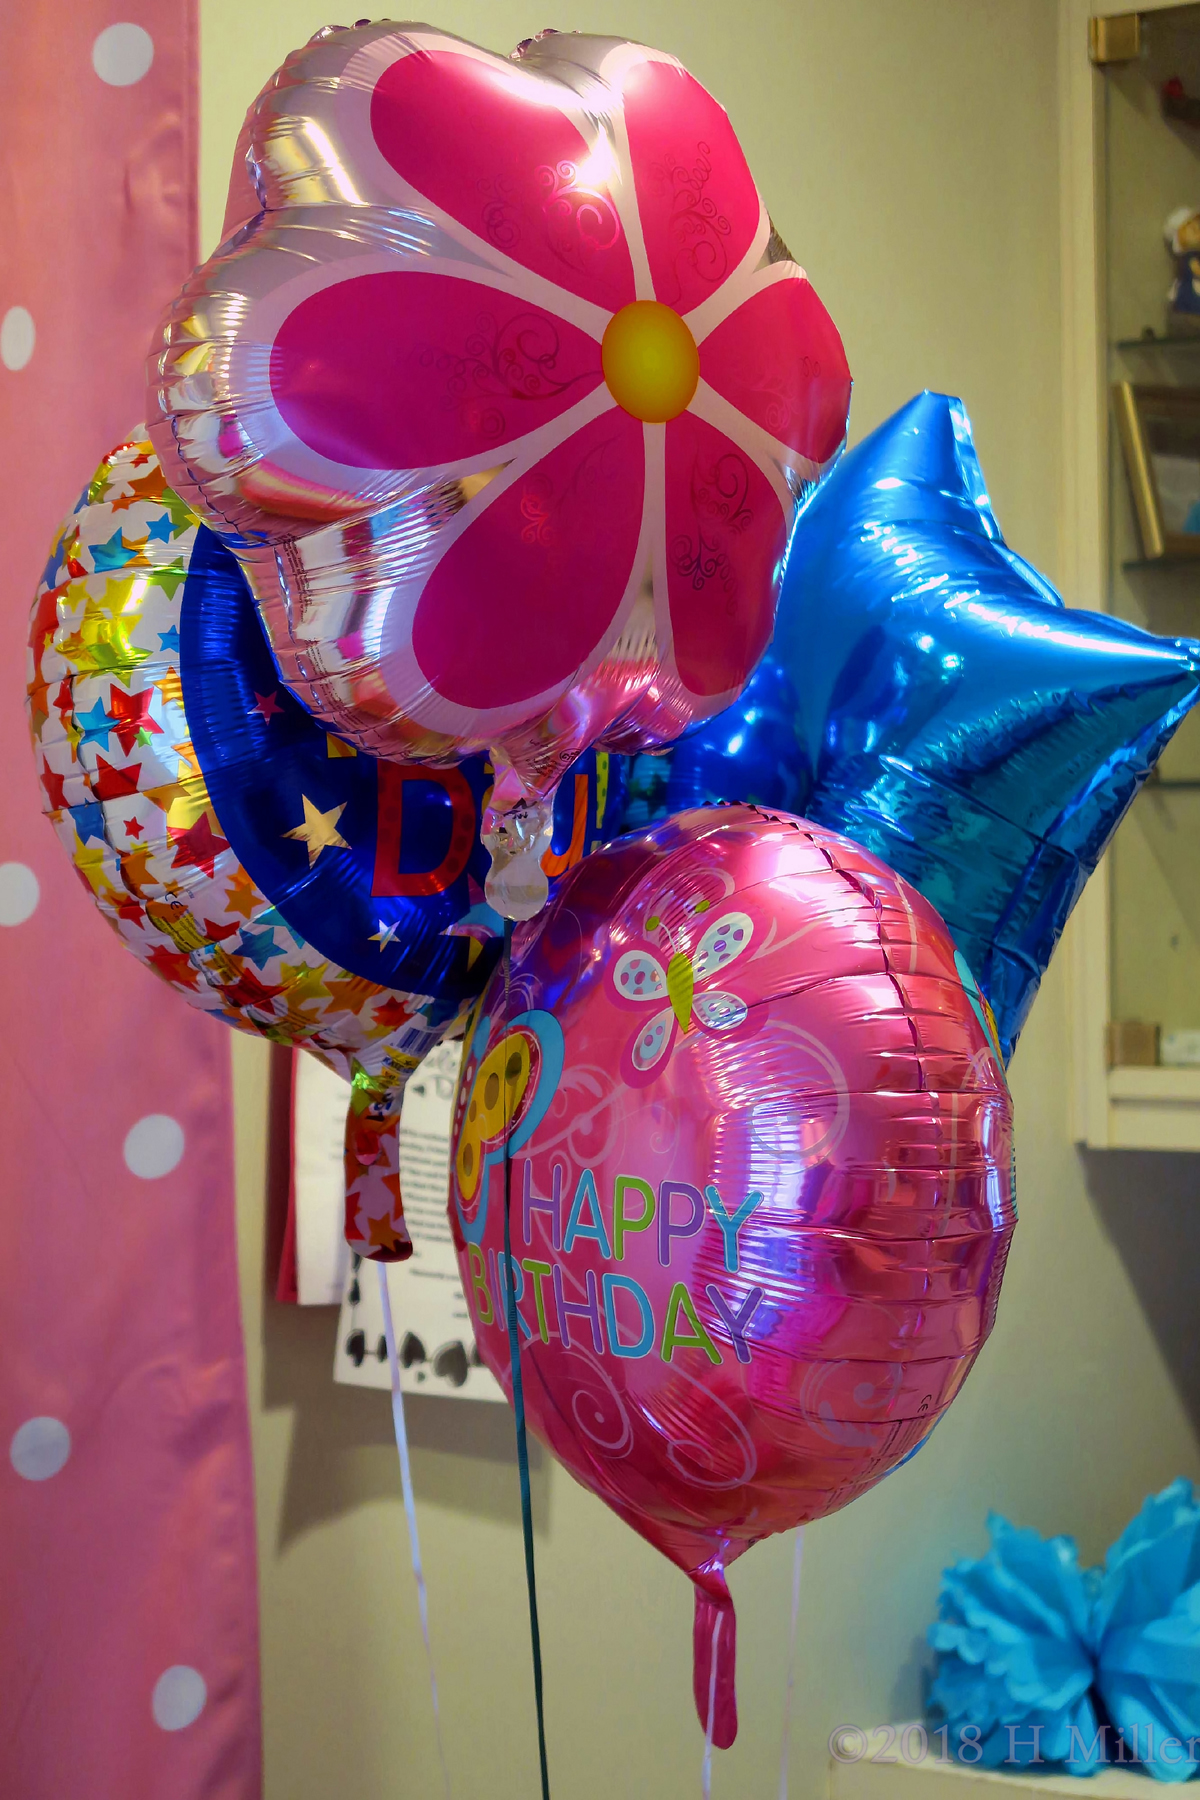 Cute Shaped Birthday Ballons For The Kids Spa Party! 